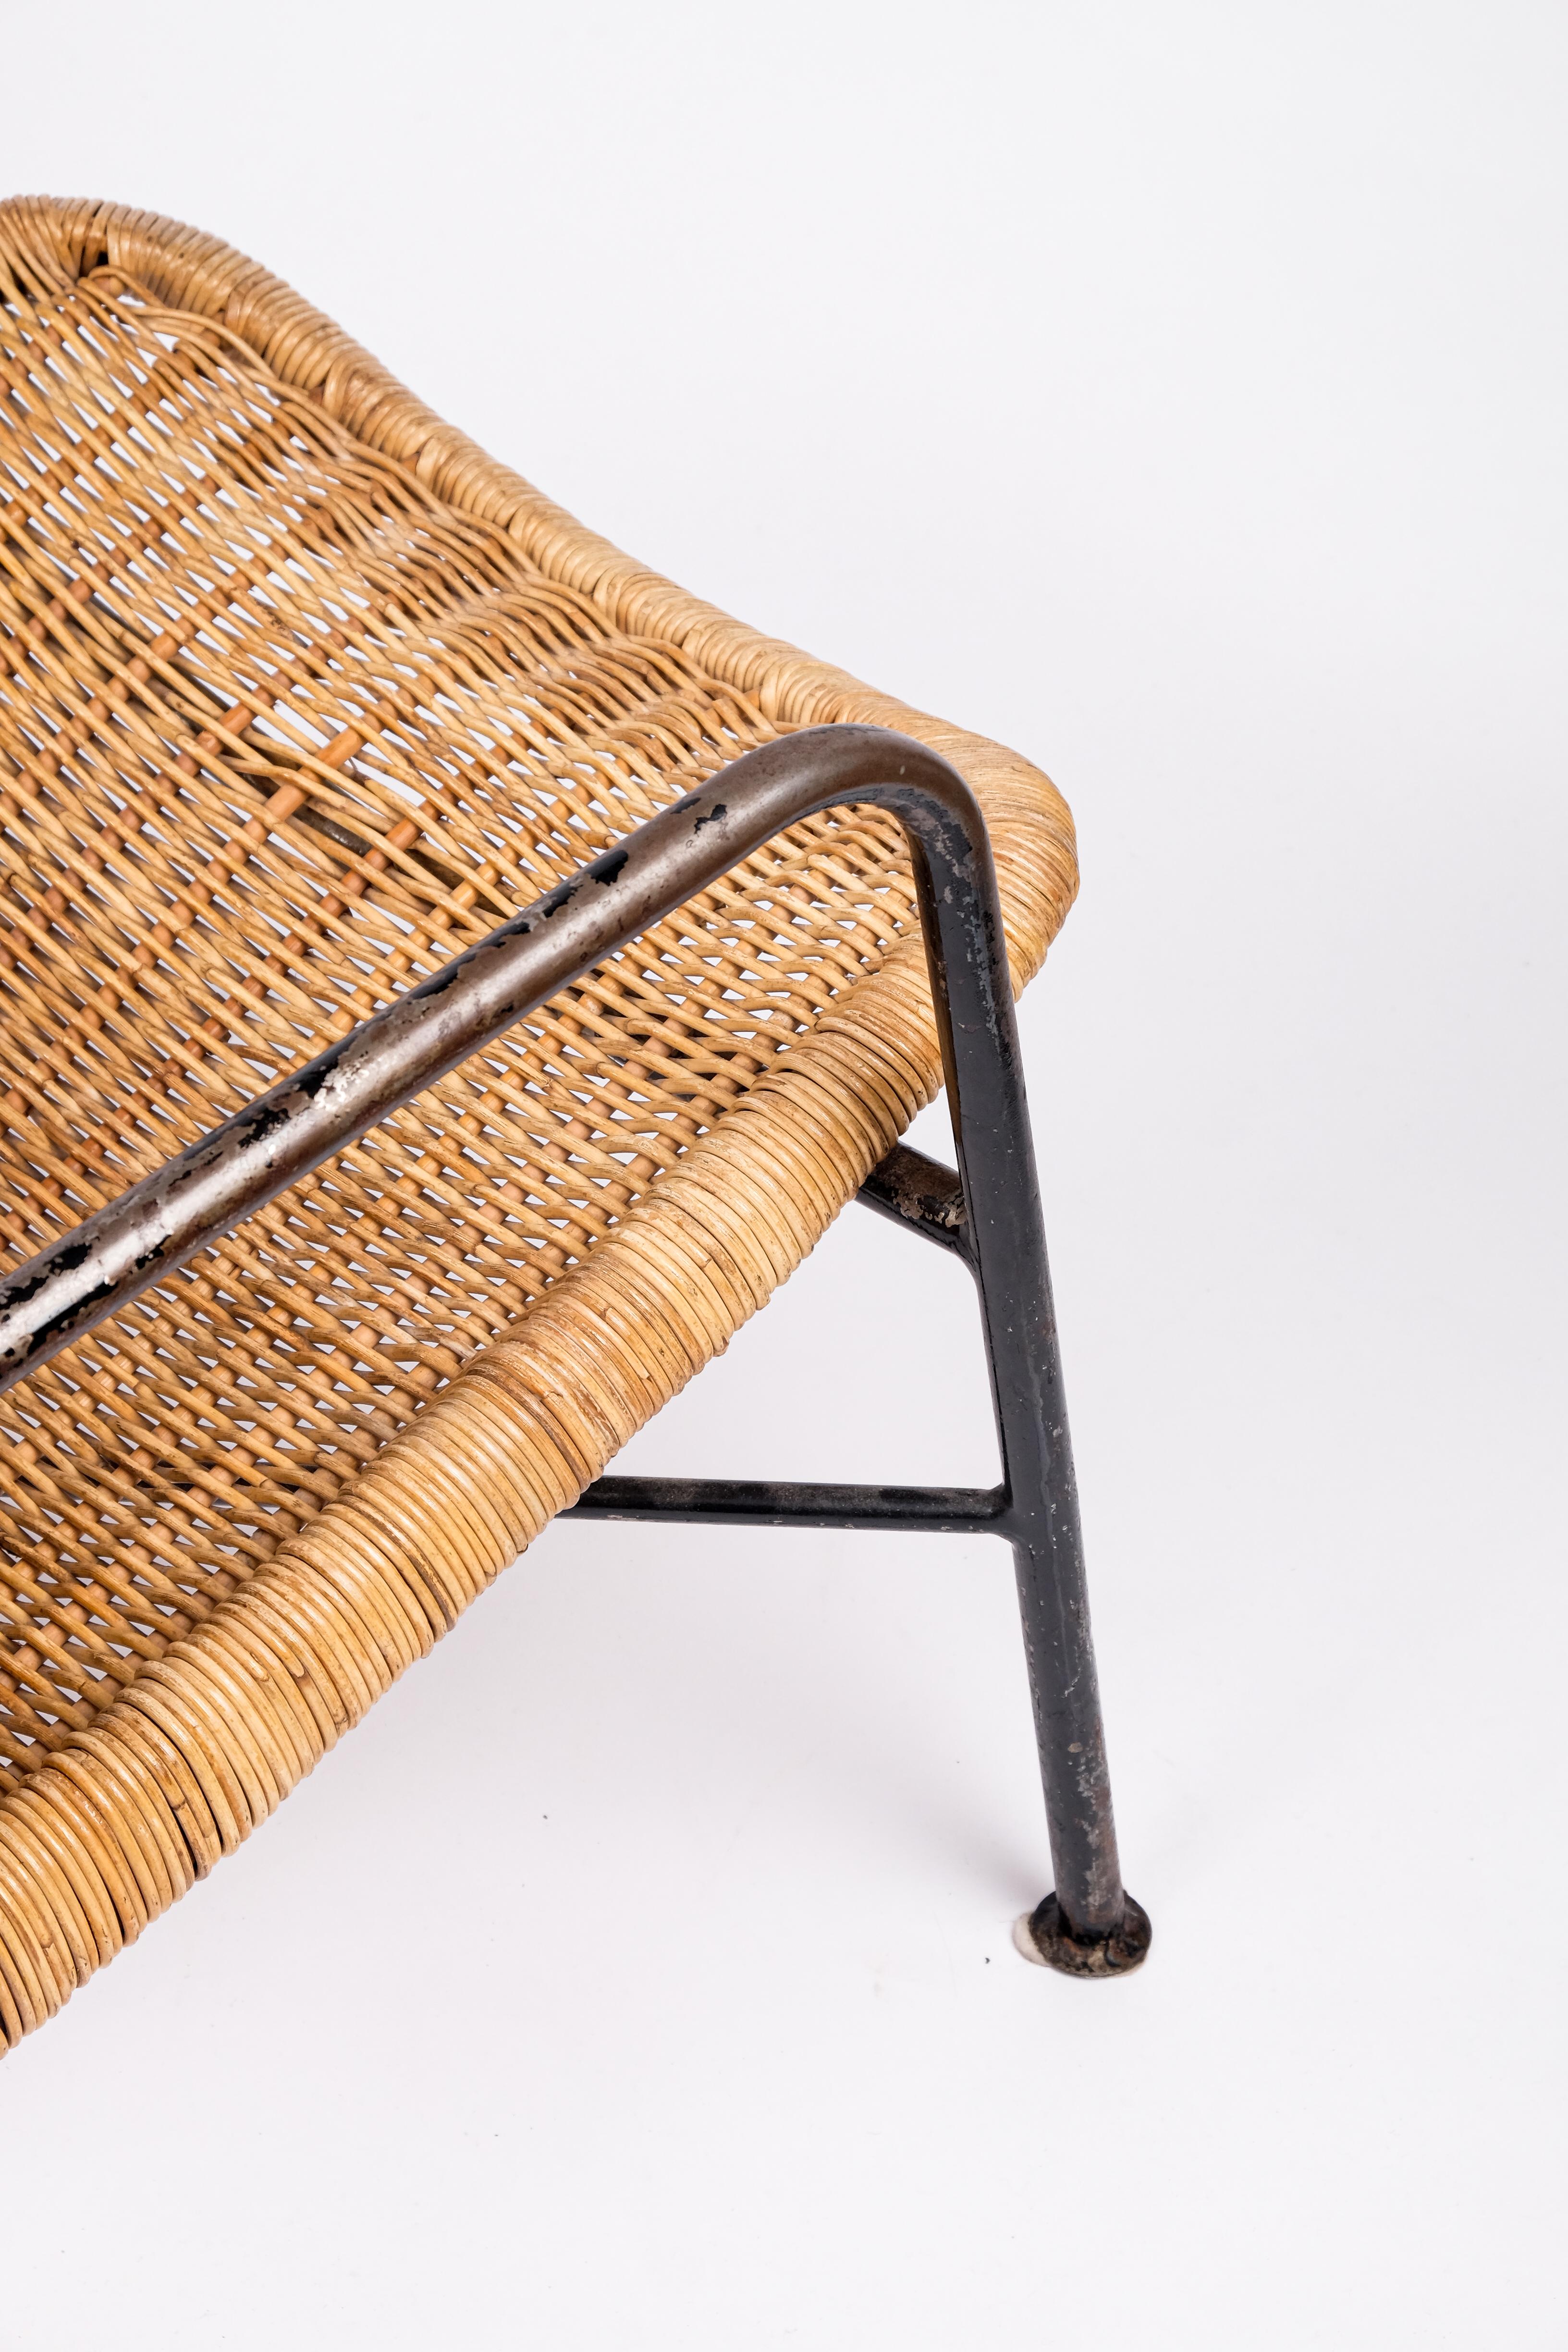 Rare Pair of Swedish Rattan Chairs, 1960s For Sale 6